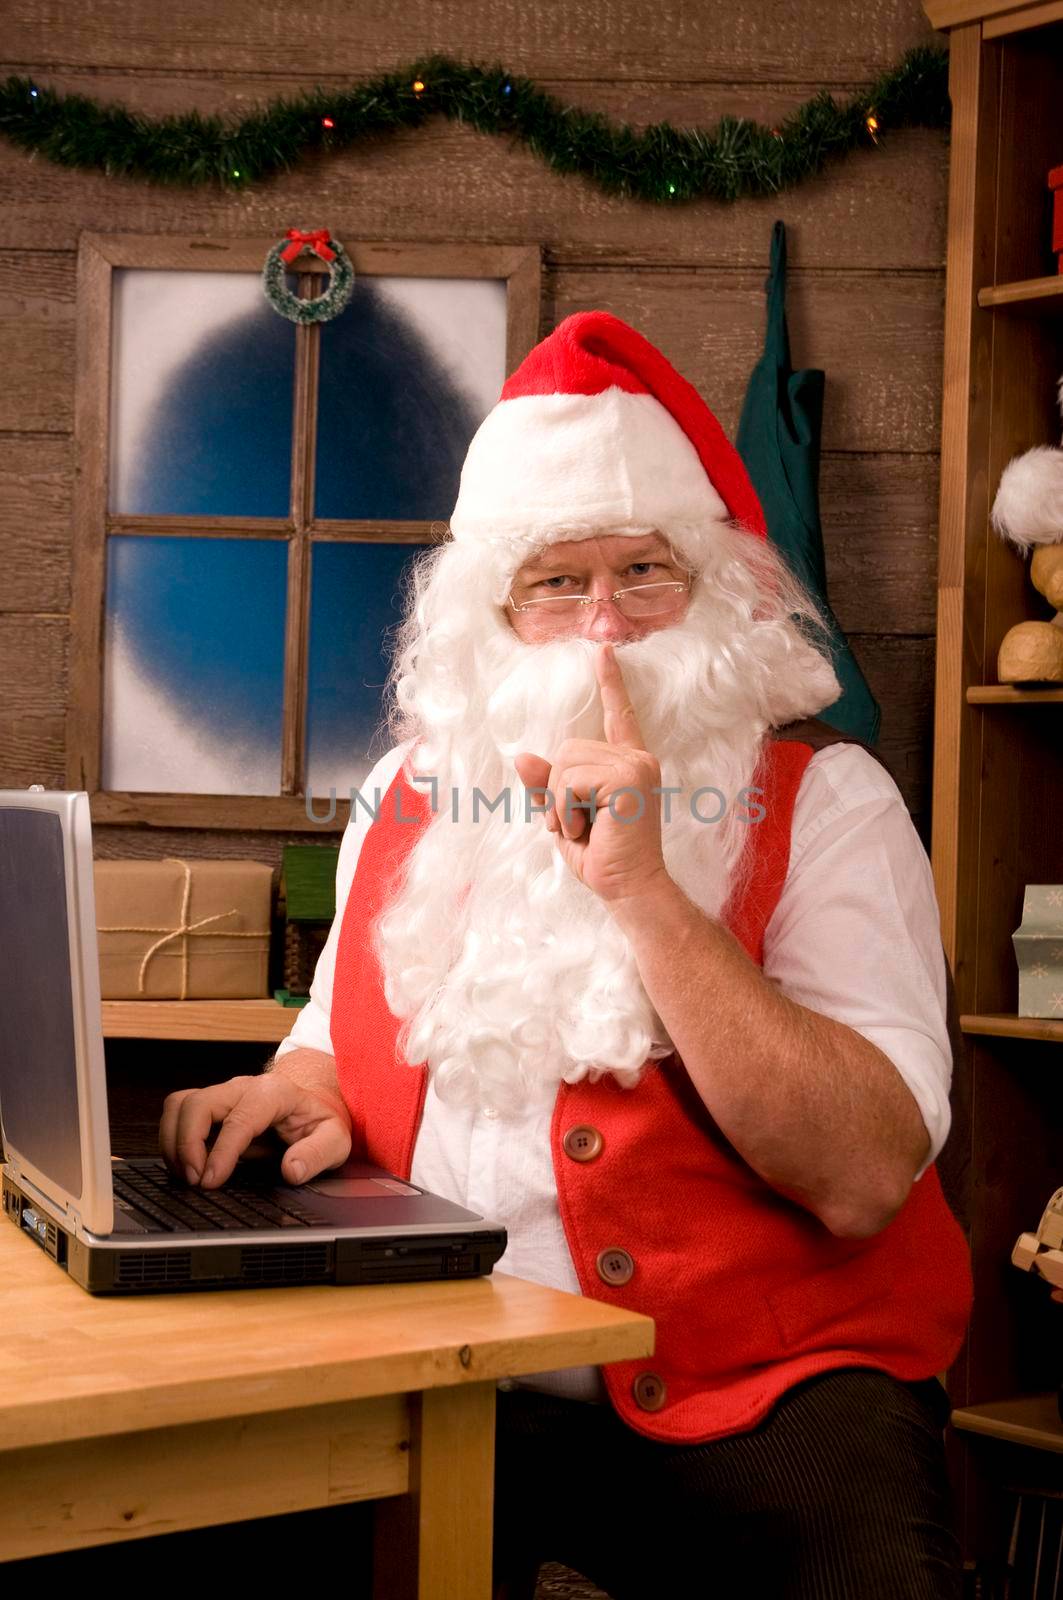 Santa Claus in Workshop Using Laptop and making Shh sign at viewer. Vertical Composition